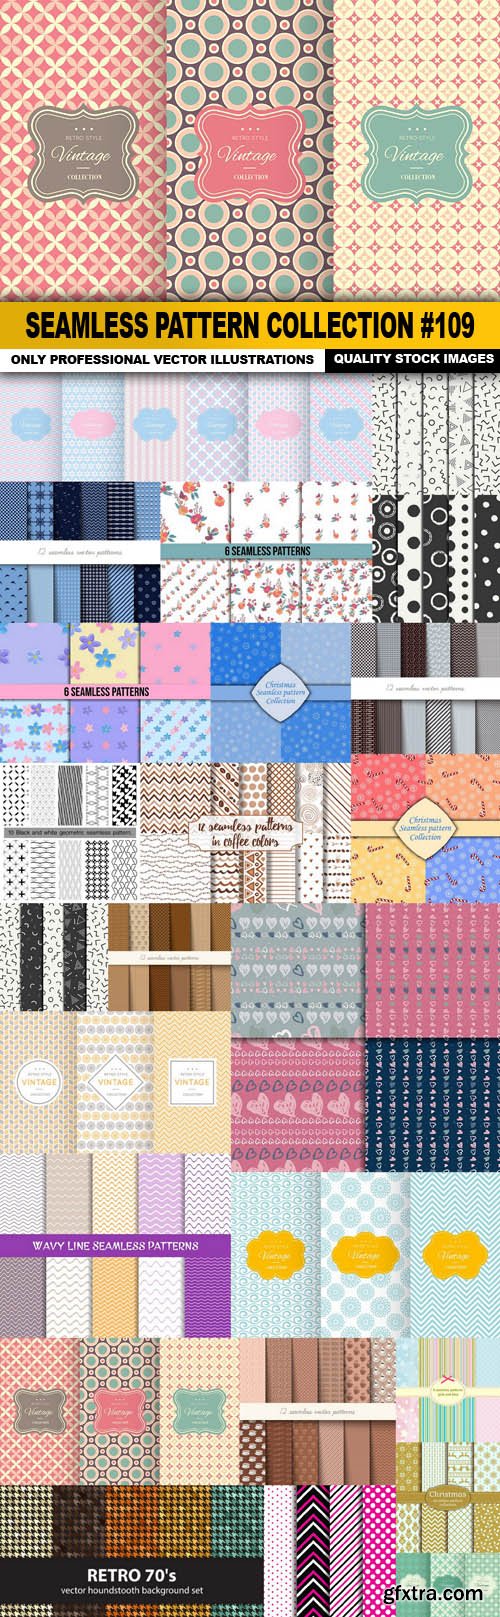 Seamless Pattern Collection #109 - 25 Vector